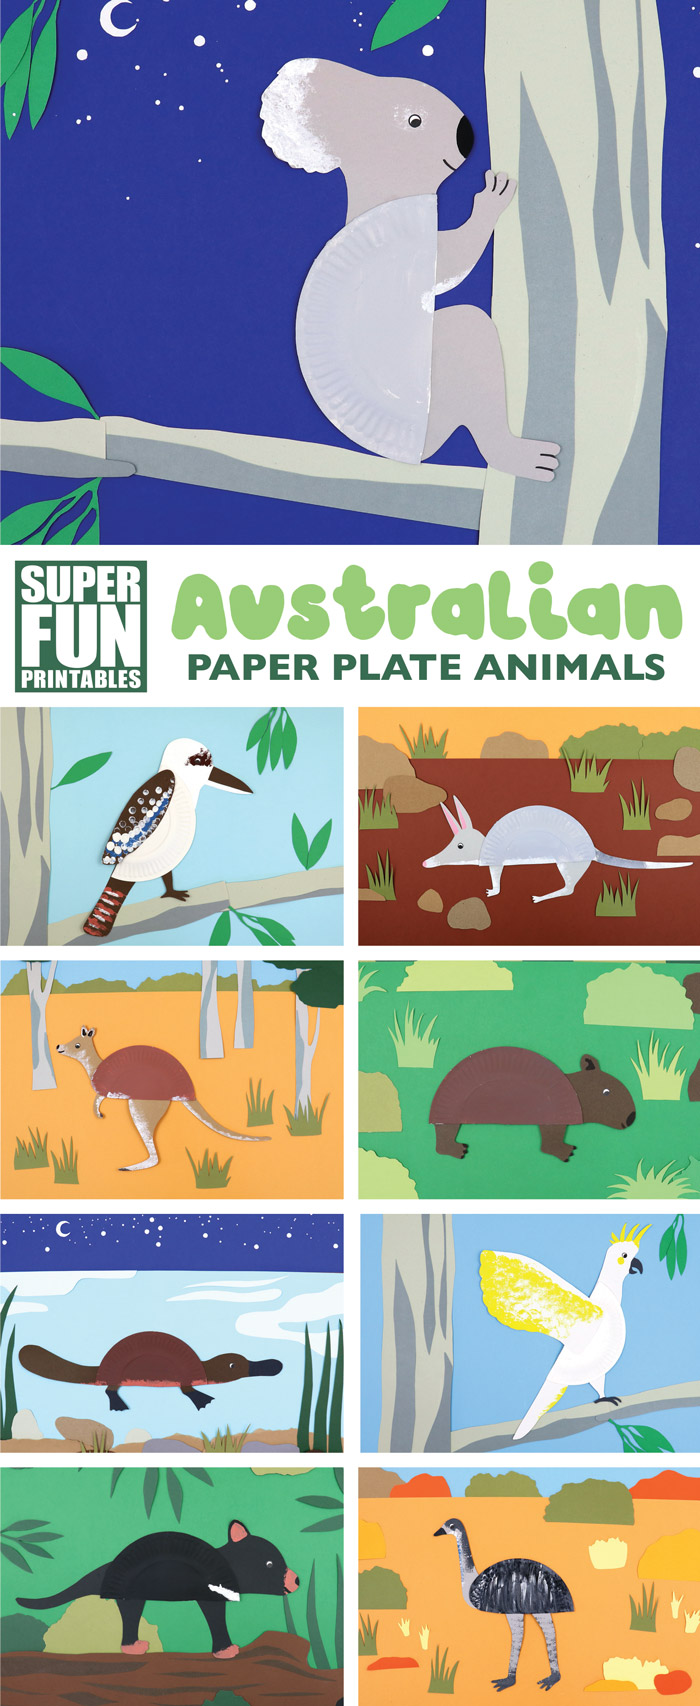 Australian paper plate animal crafts for kids